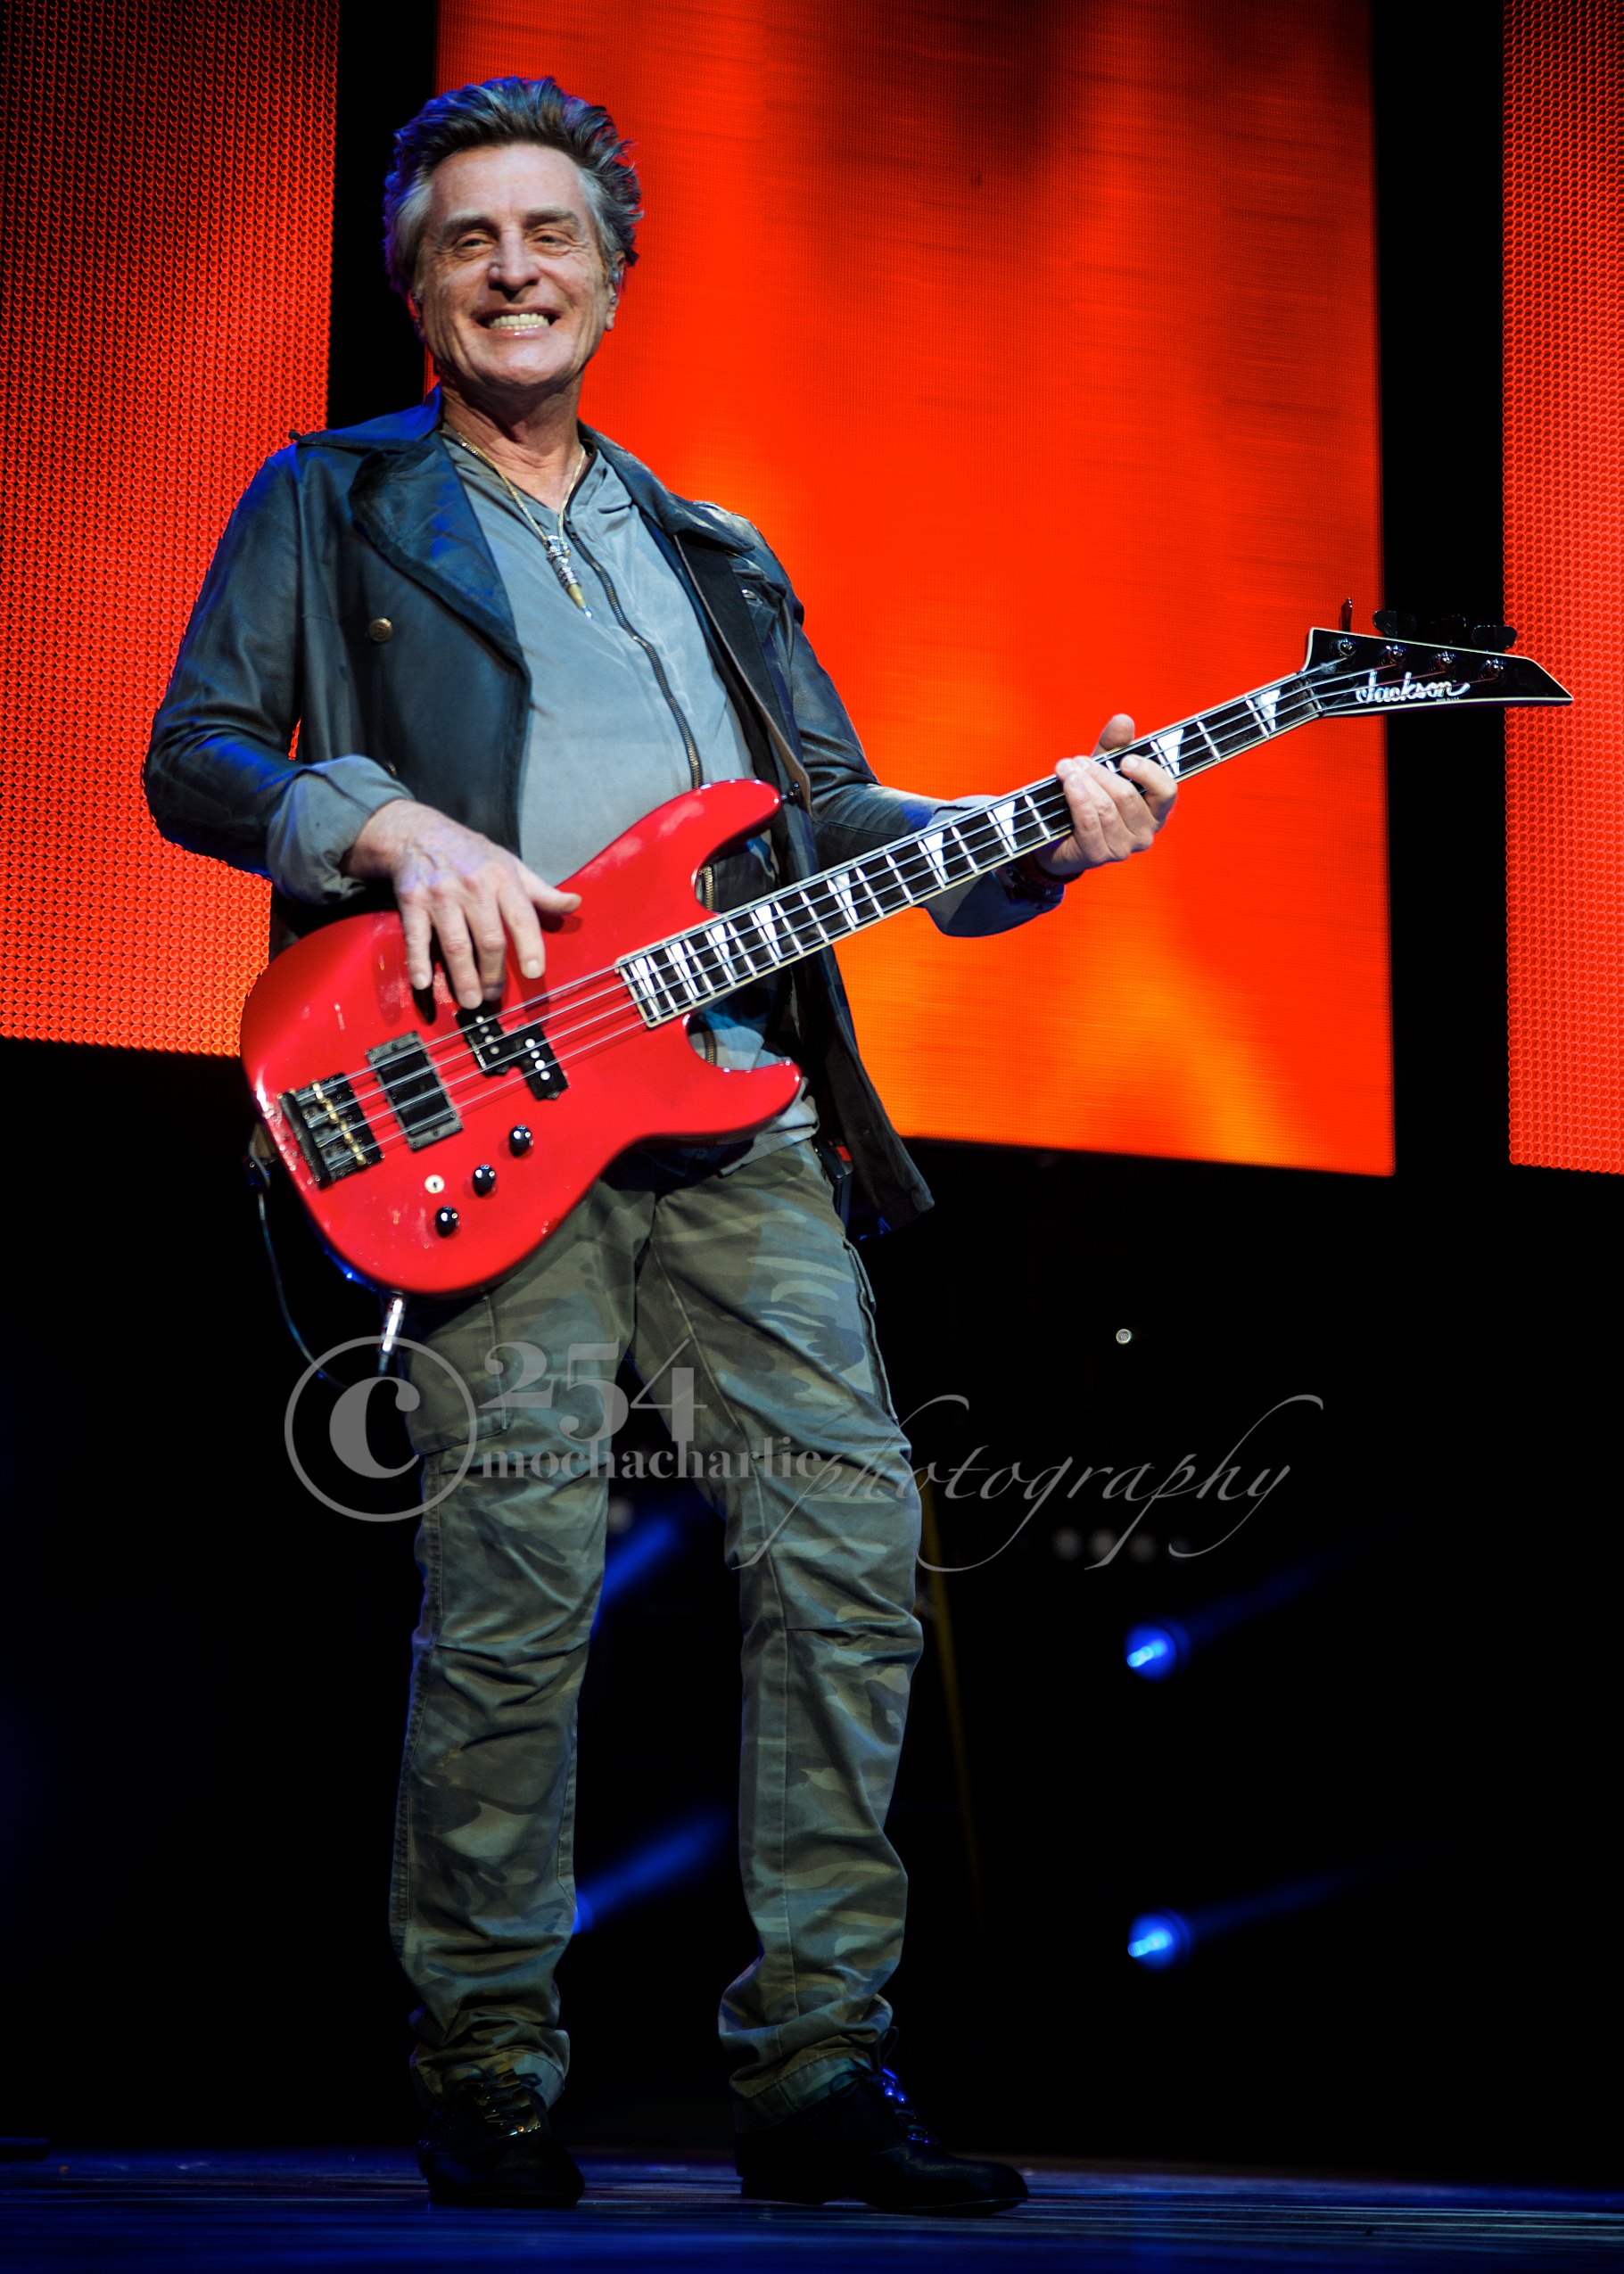 Journey at White River Ampitheater (Photo by Mocha Charlie)